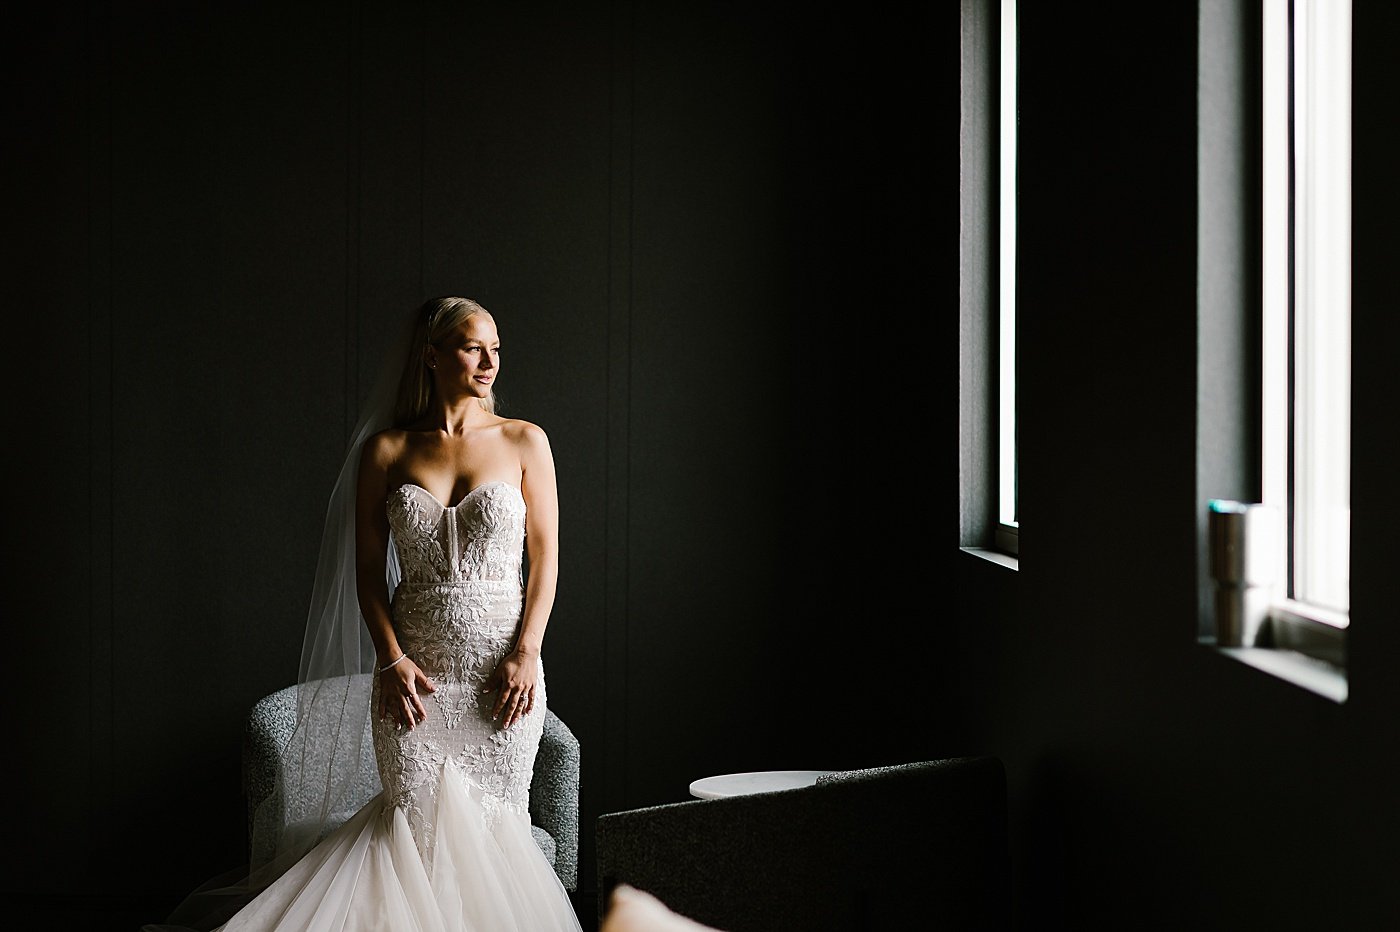 Katie and Micah's Bottleworks Indianapolis Wedding Rebecca Shehorn Photography22.jpg